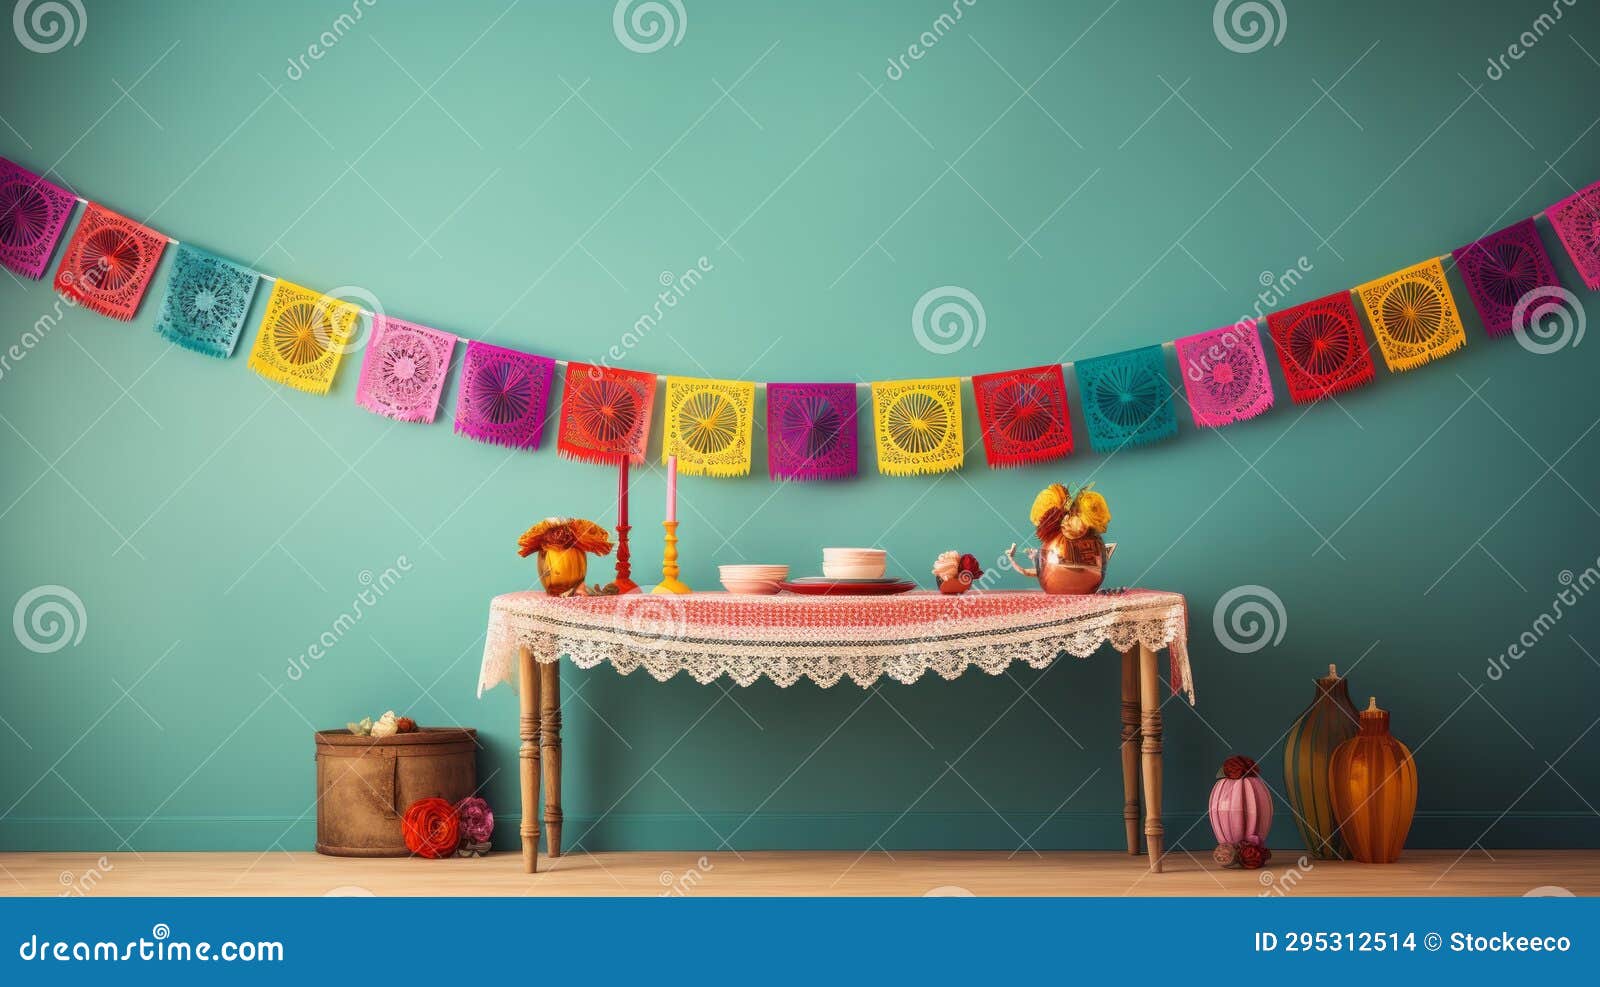 colorful mexican mejilla banners: vibrant table decor inspired by folklore